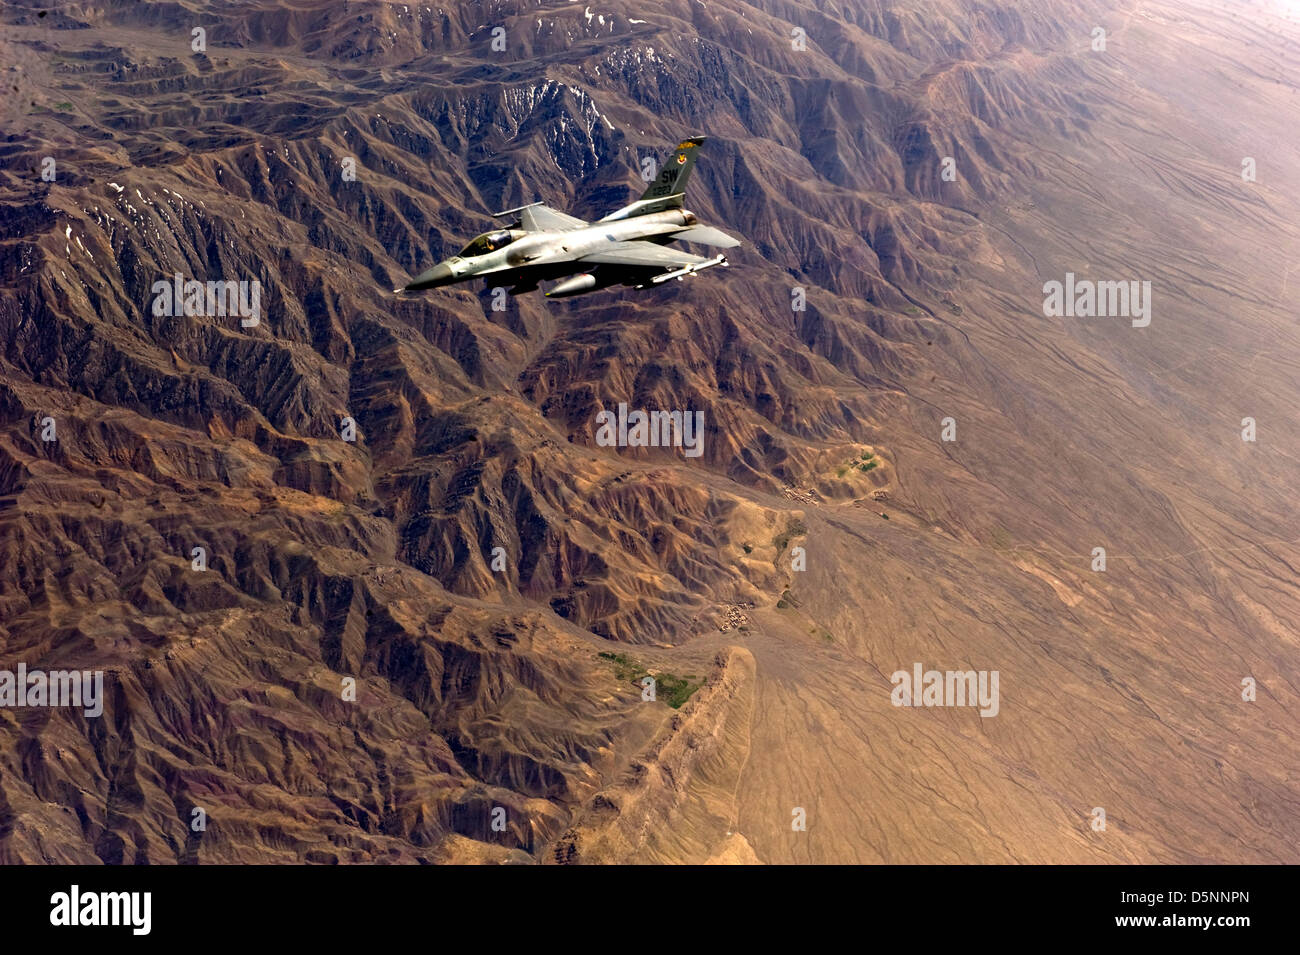 A US Air Force F-15E Strike Eagle resumes combat operations after refueling April 1, 2013 over Afghanistan. Stock Photo